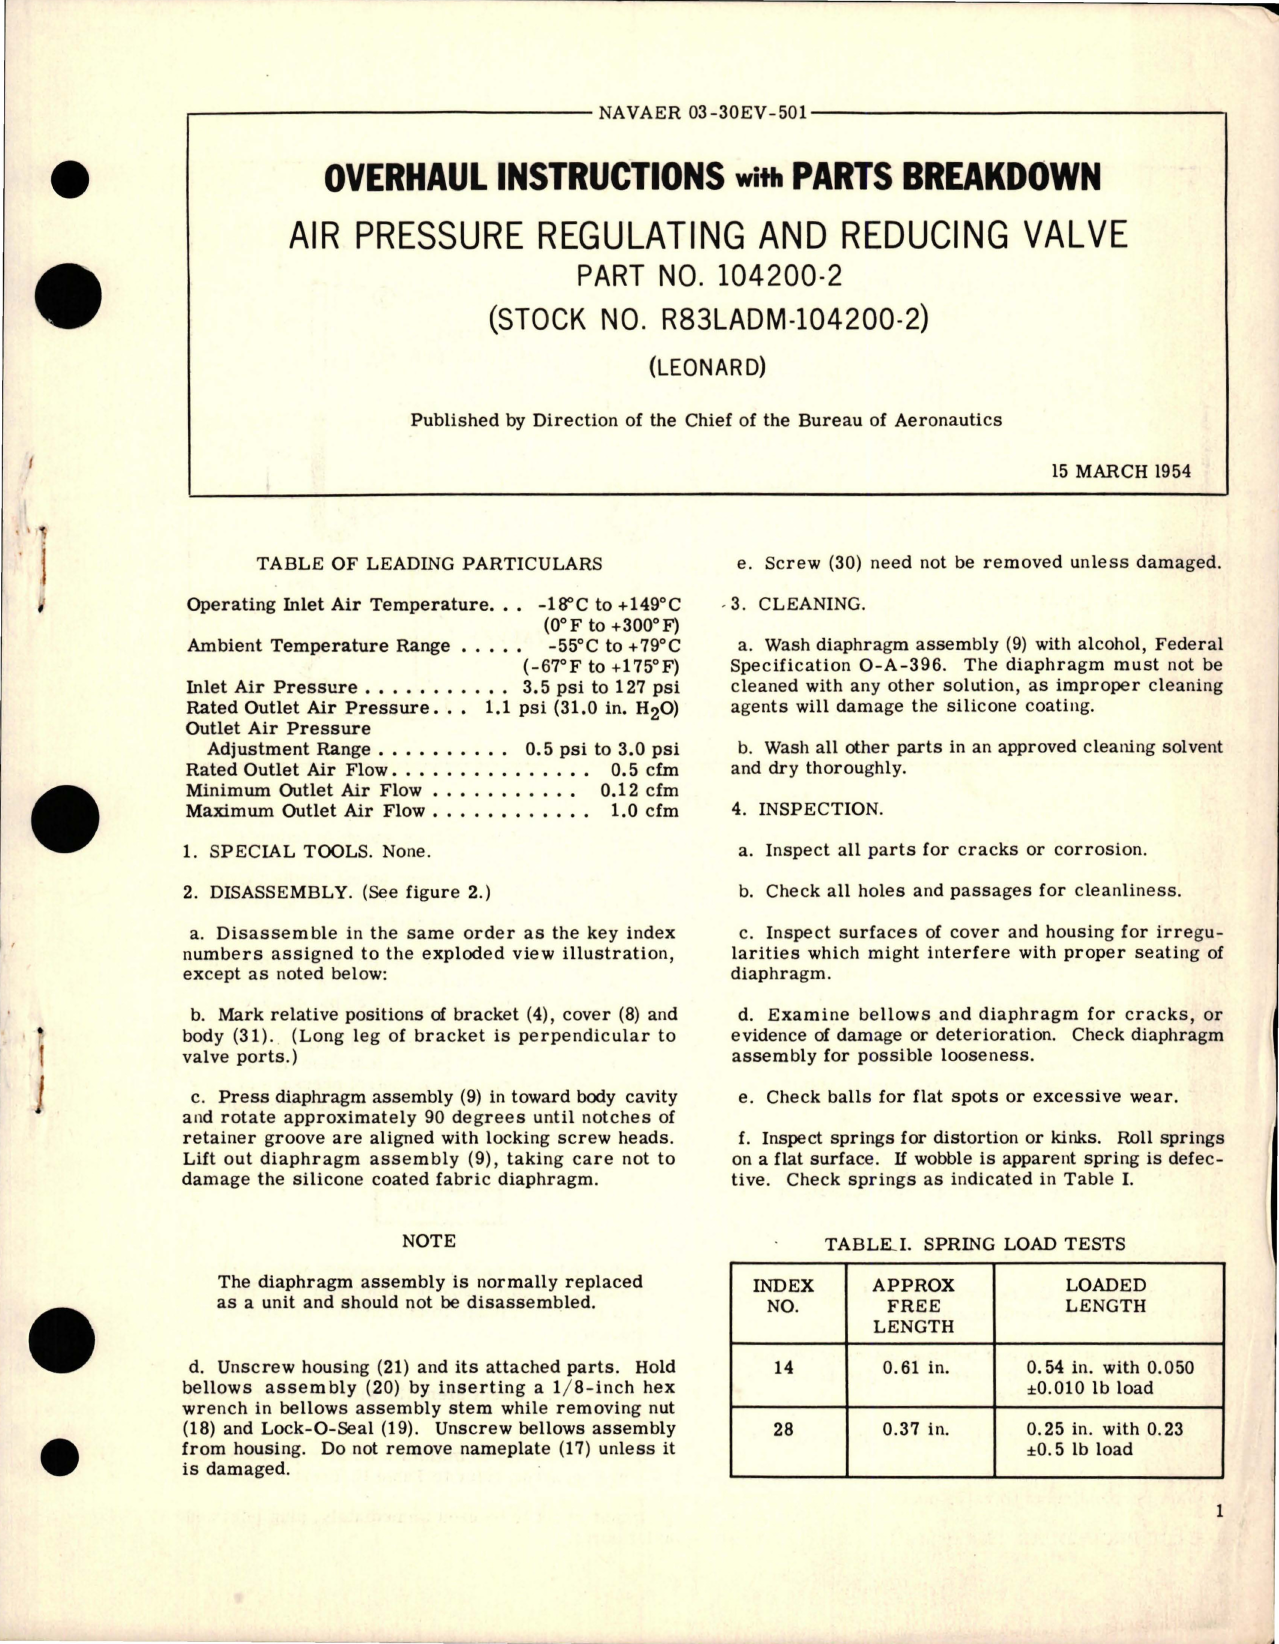 Sample page 1 from AirCorps Library document: Overhaul Instructions with Parts Breakdown for Air Pressure Regulating & Reducing Valve - Part 104200-2 